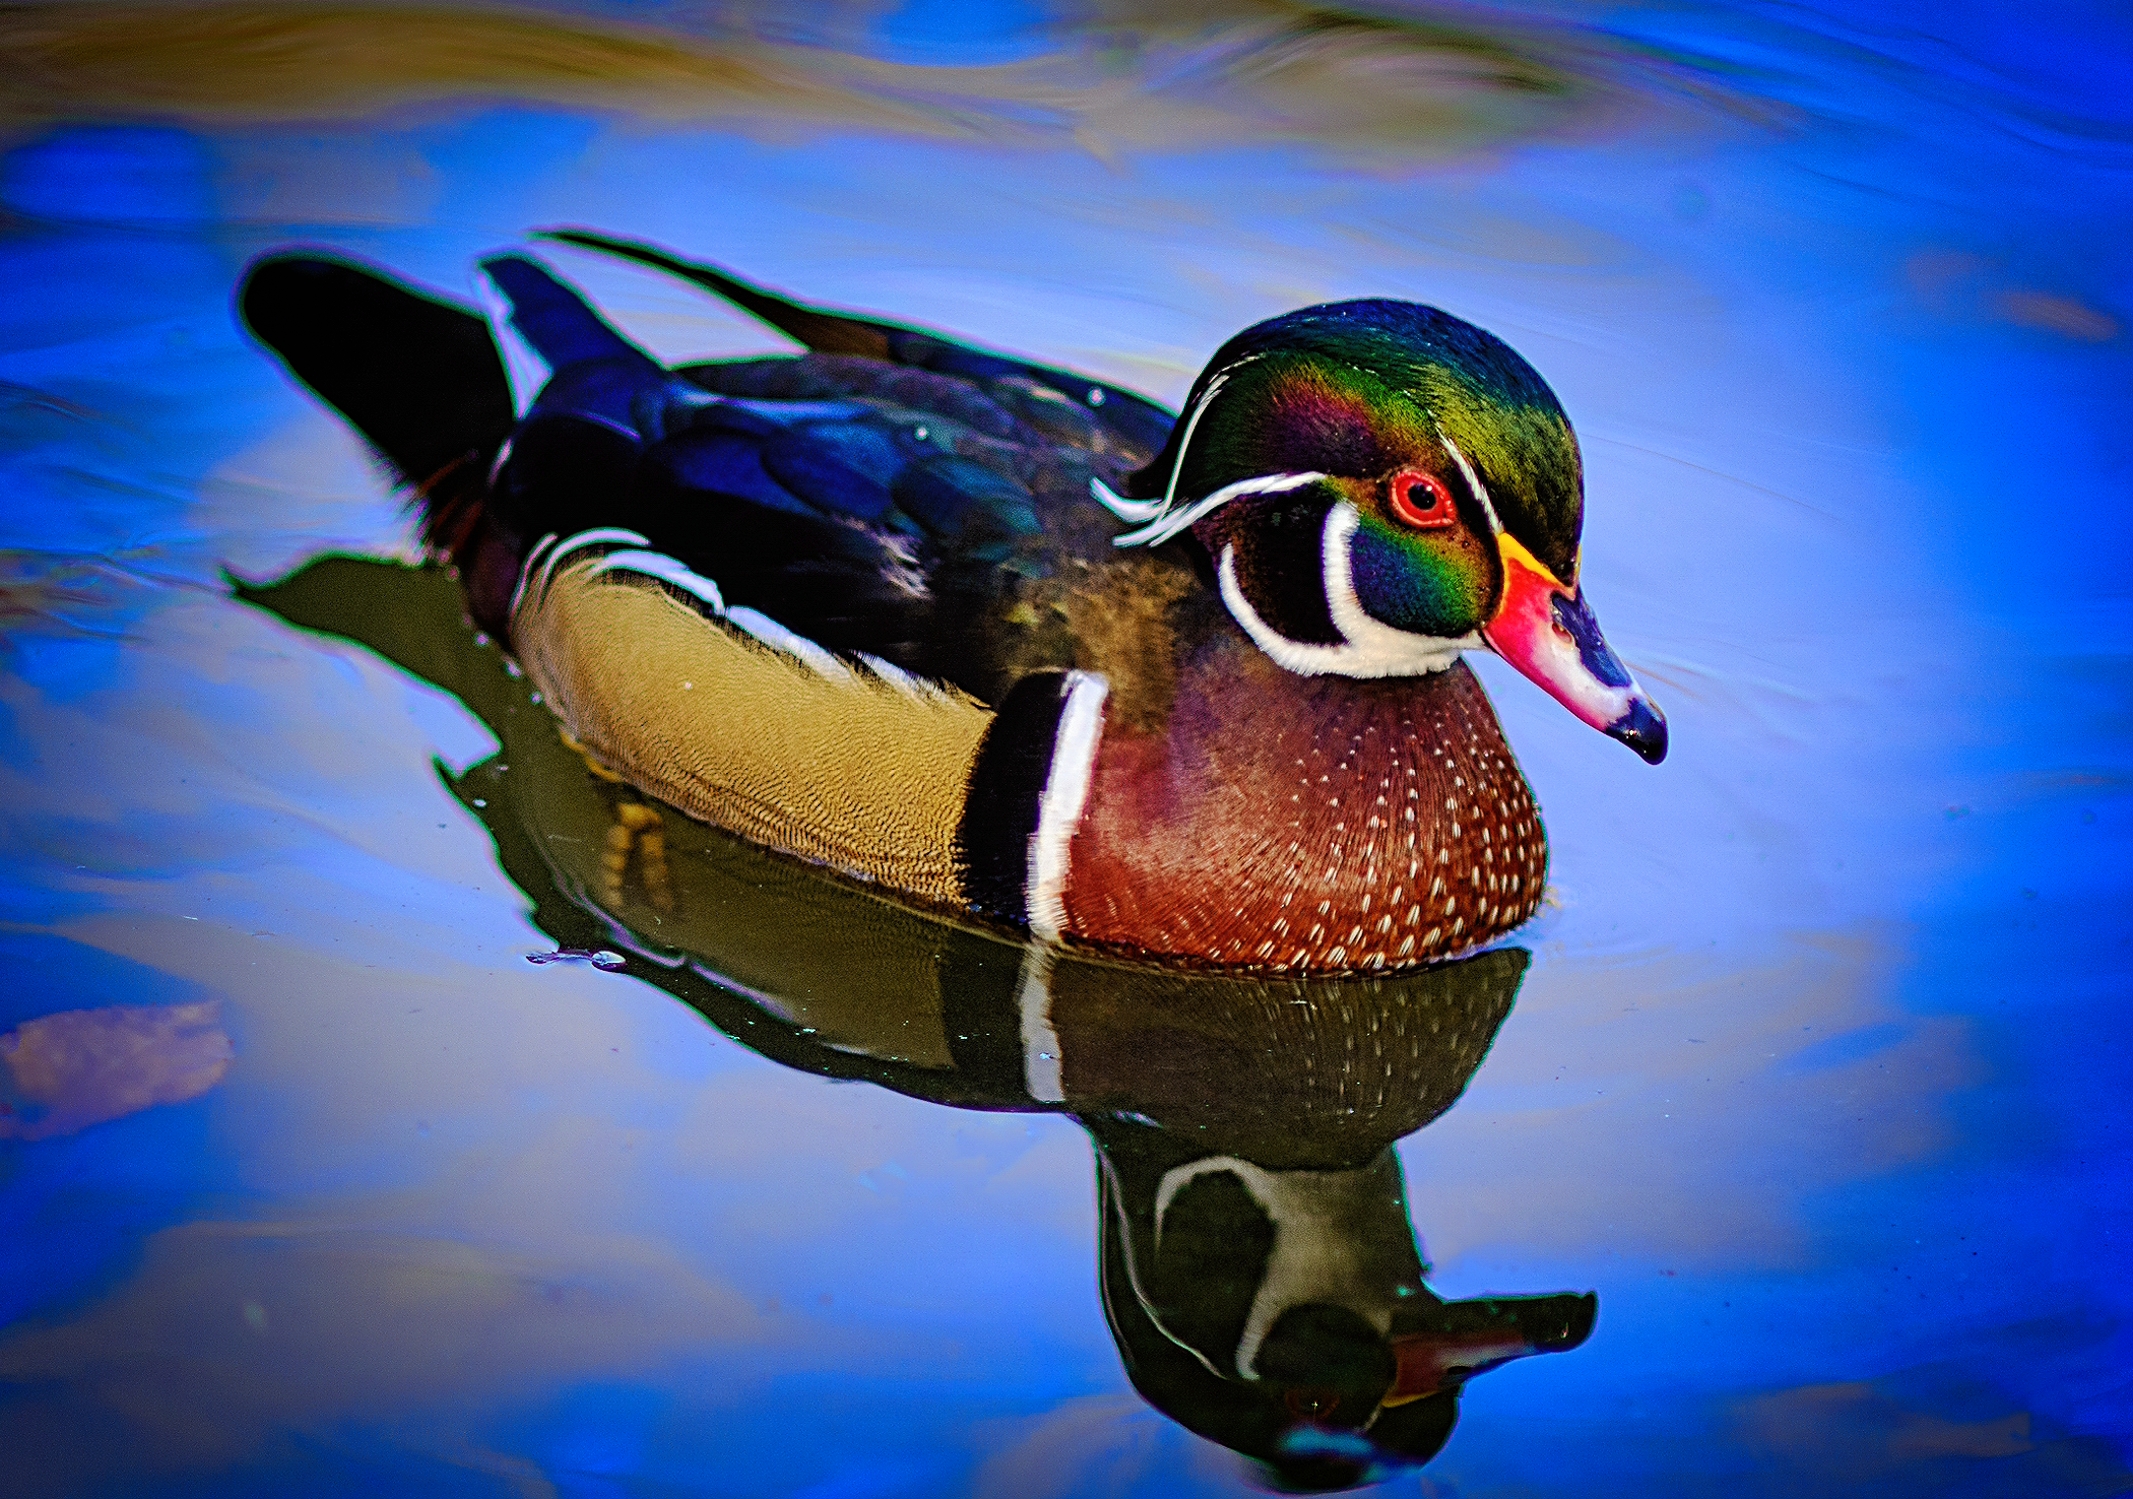 The wood duck, native to North America, is America’s most beautiful duck. (Copyright Fred J. Eckert)